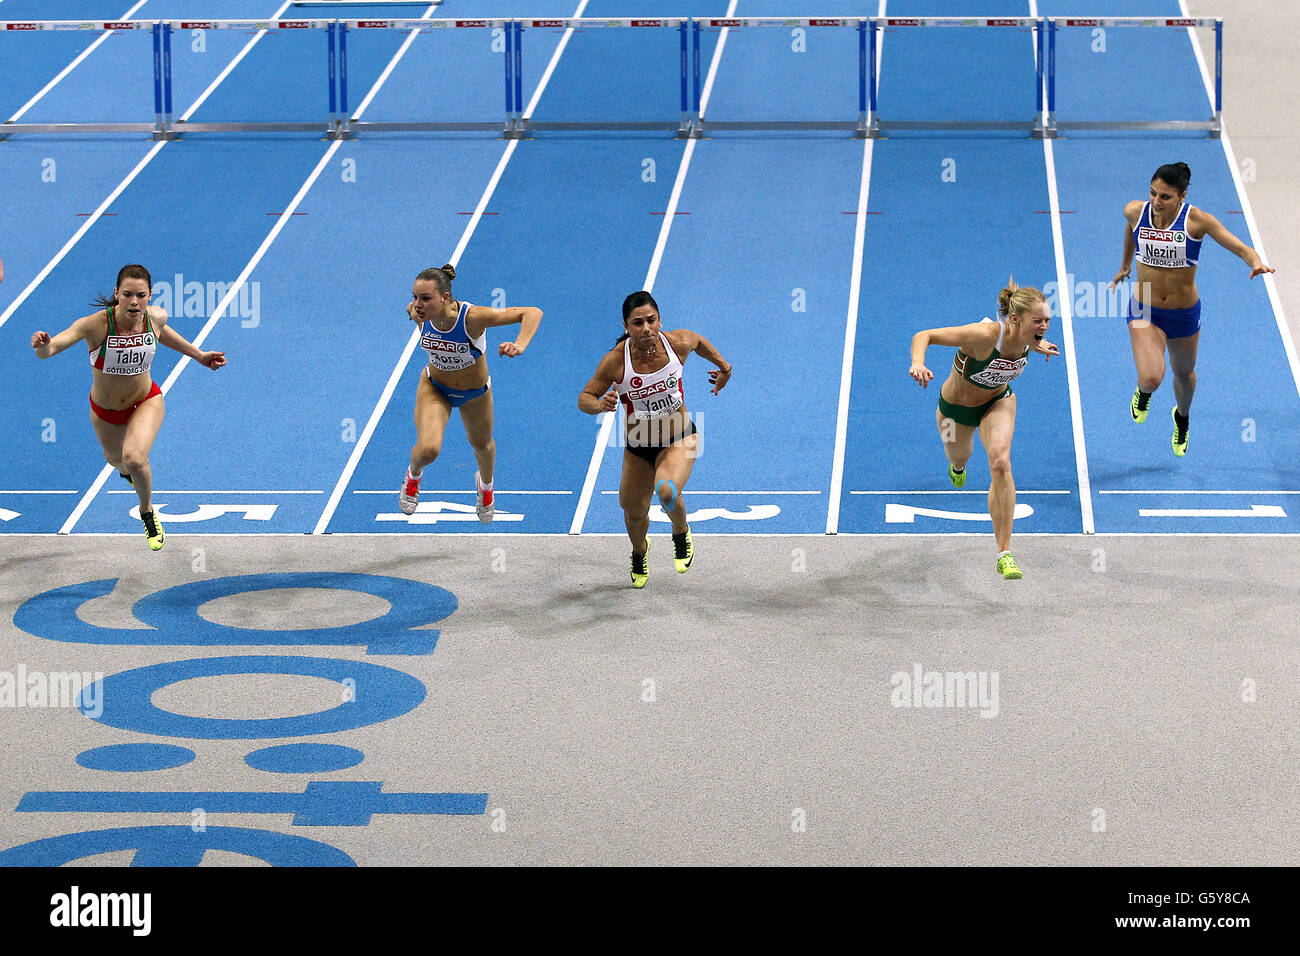 (Left to Right) Belarus' Alina Talay, Italy's Veronica Borsi, Turkey's Nevin Yanit, Italy's Derval O'Rourke and Finland's Nooralotta Nazri cross the finish line in the Womens 60 metres hurdles final Stock Photo